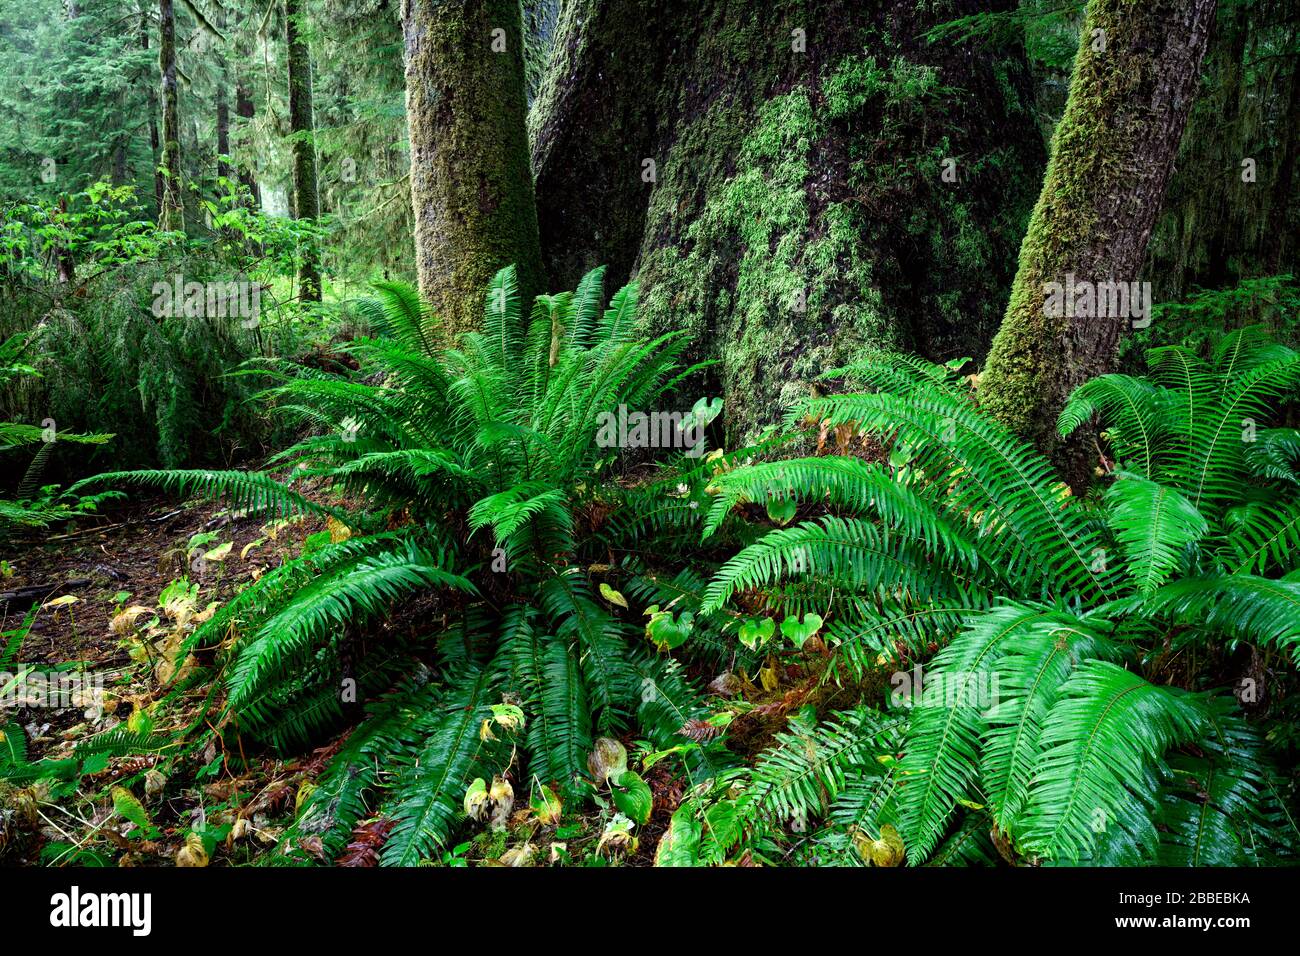 Western swordferns, Polystichum munitum, at the base of large Sitka spruce, Picea sitchensis, Carmanah Walbran Provincial Park, Vancouver Island, BC, Canada Stock Photo